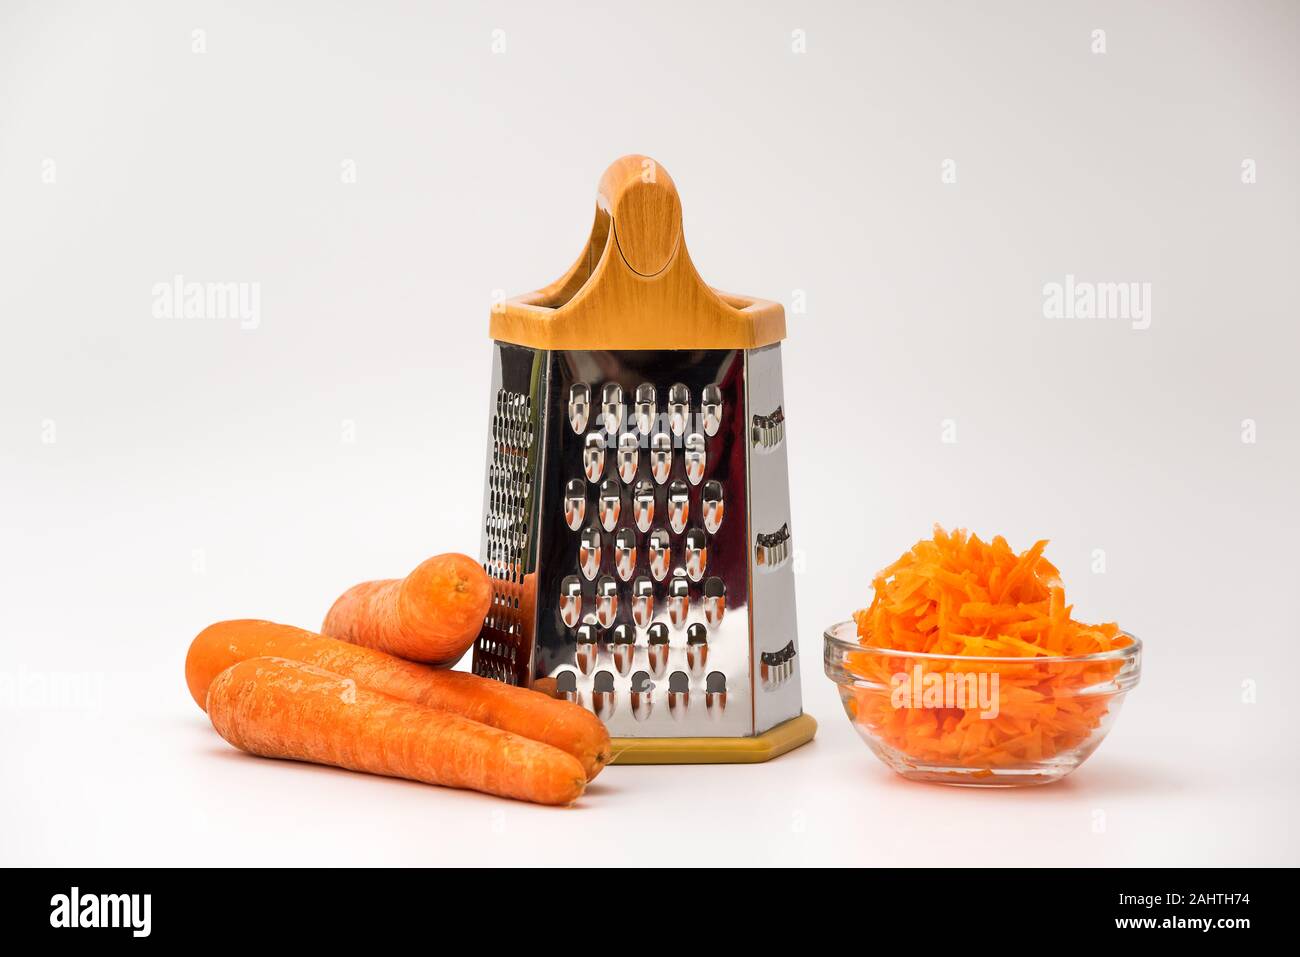 https://c8.alamy.com/comp/2AHTH74/fresh-grated-carrot-in-a-bowl-and-layout-of-carrots-and-grater-isolated-on-white-background-2AHTH74.jpg